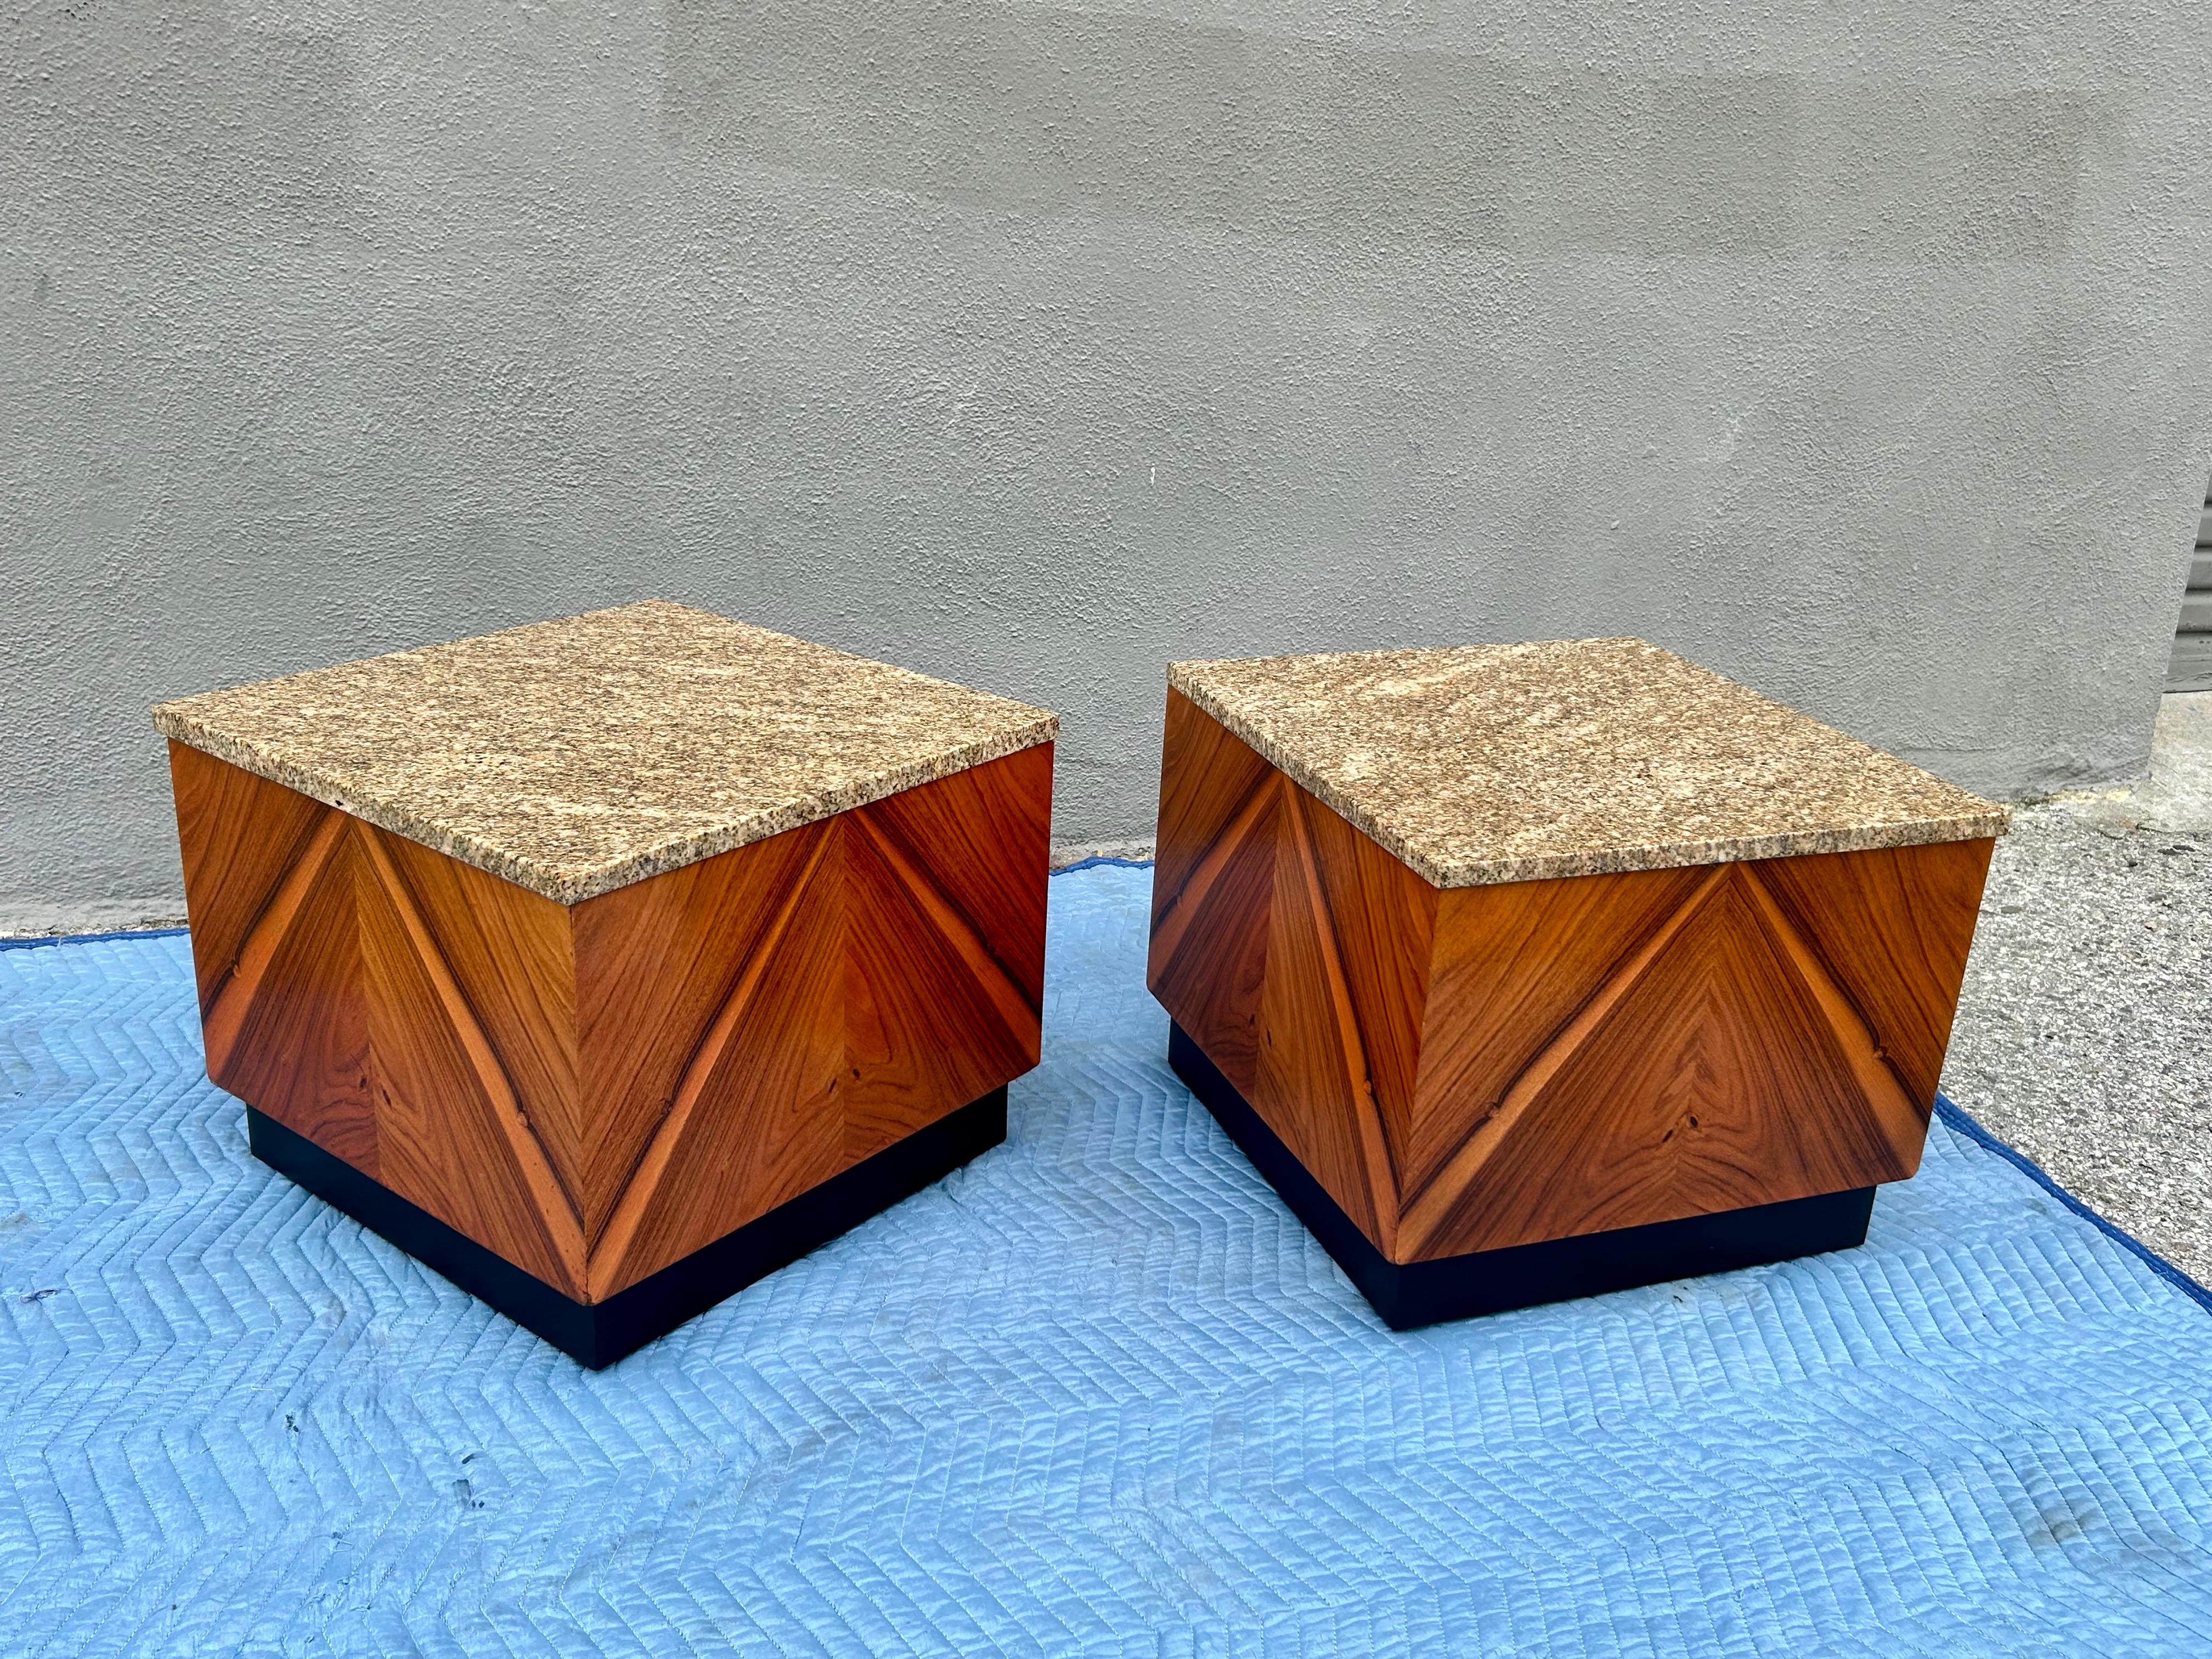 Fun pair of cube designs on castors with book matched wood veneer and marble tops
Great for any occasion as end tables, coffee tables or pedestals.
They are in original condition with minor wear and patina. 
Some barley visible nicks on the corners